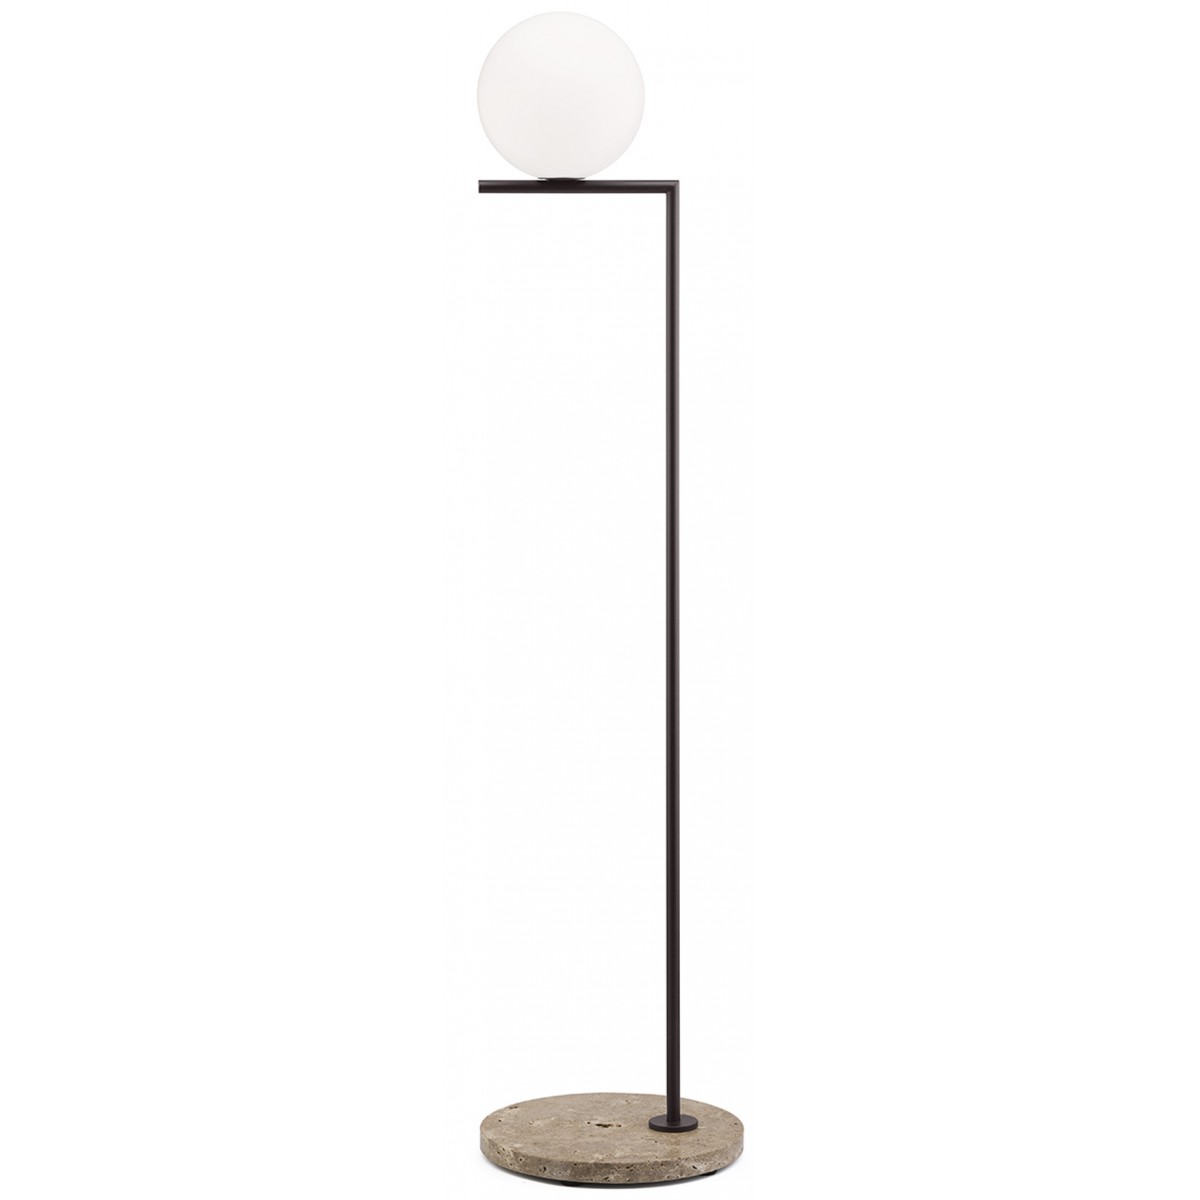 deep brown + travertino imperiale base - F012A01C018 - IC F1 Outdoor Floor Lamp